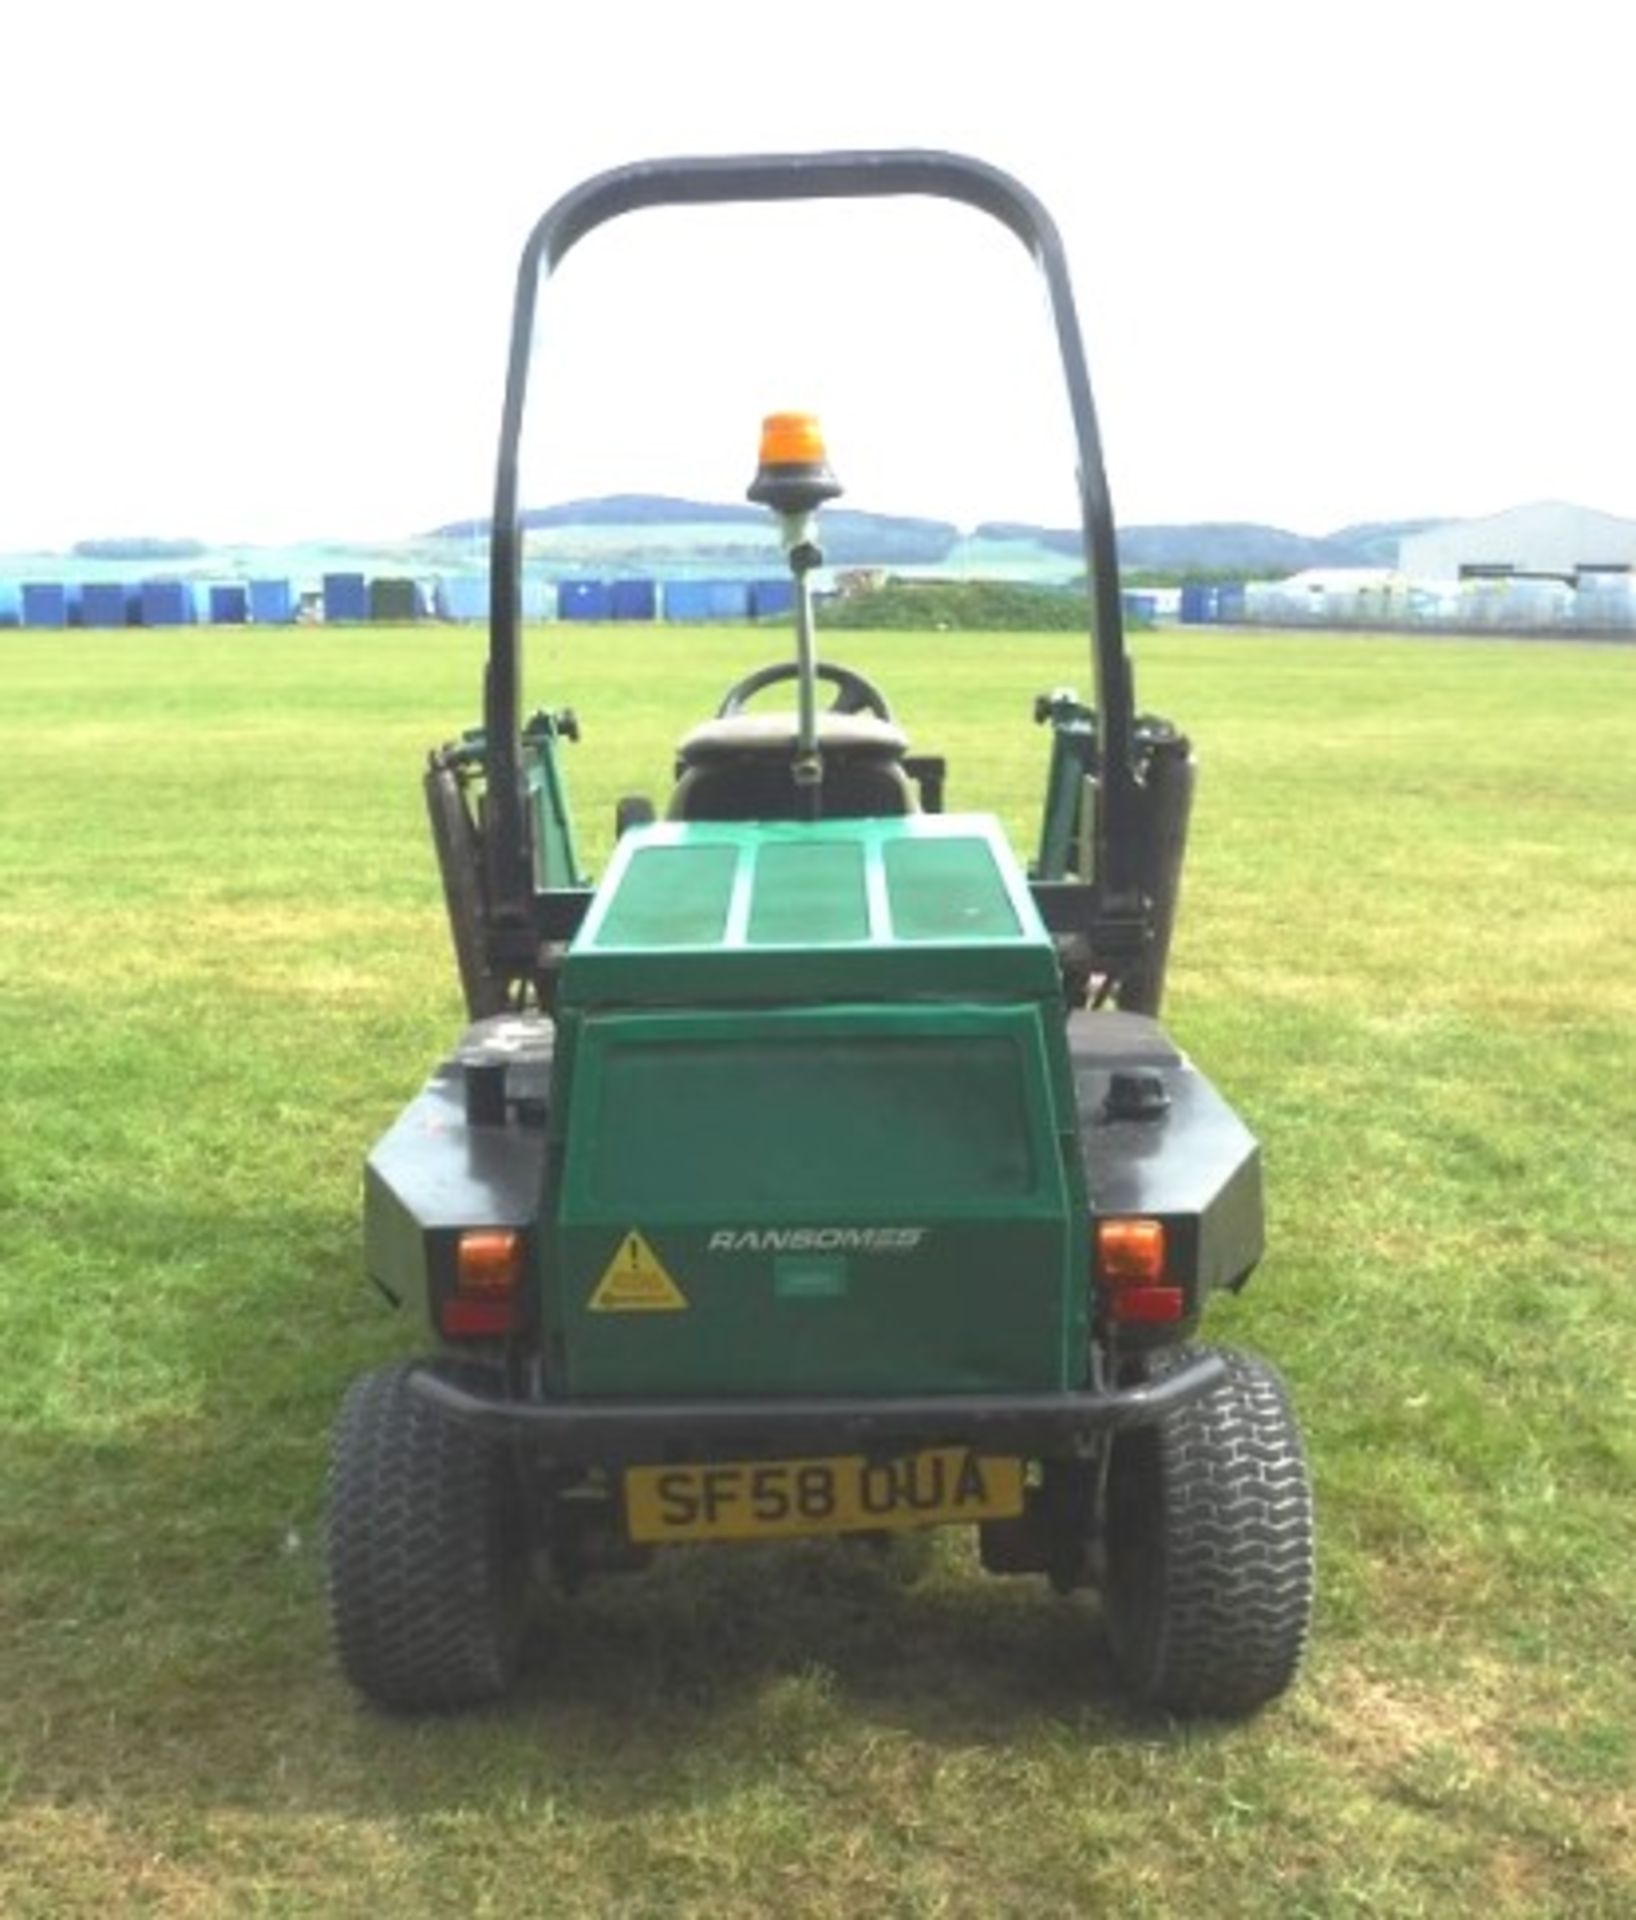 2009 RANSOME PARKWAY 2250 PLUS MOWER. REG NO SF58 OUA. 2714 HRS - Image 16 of 19